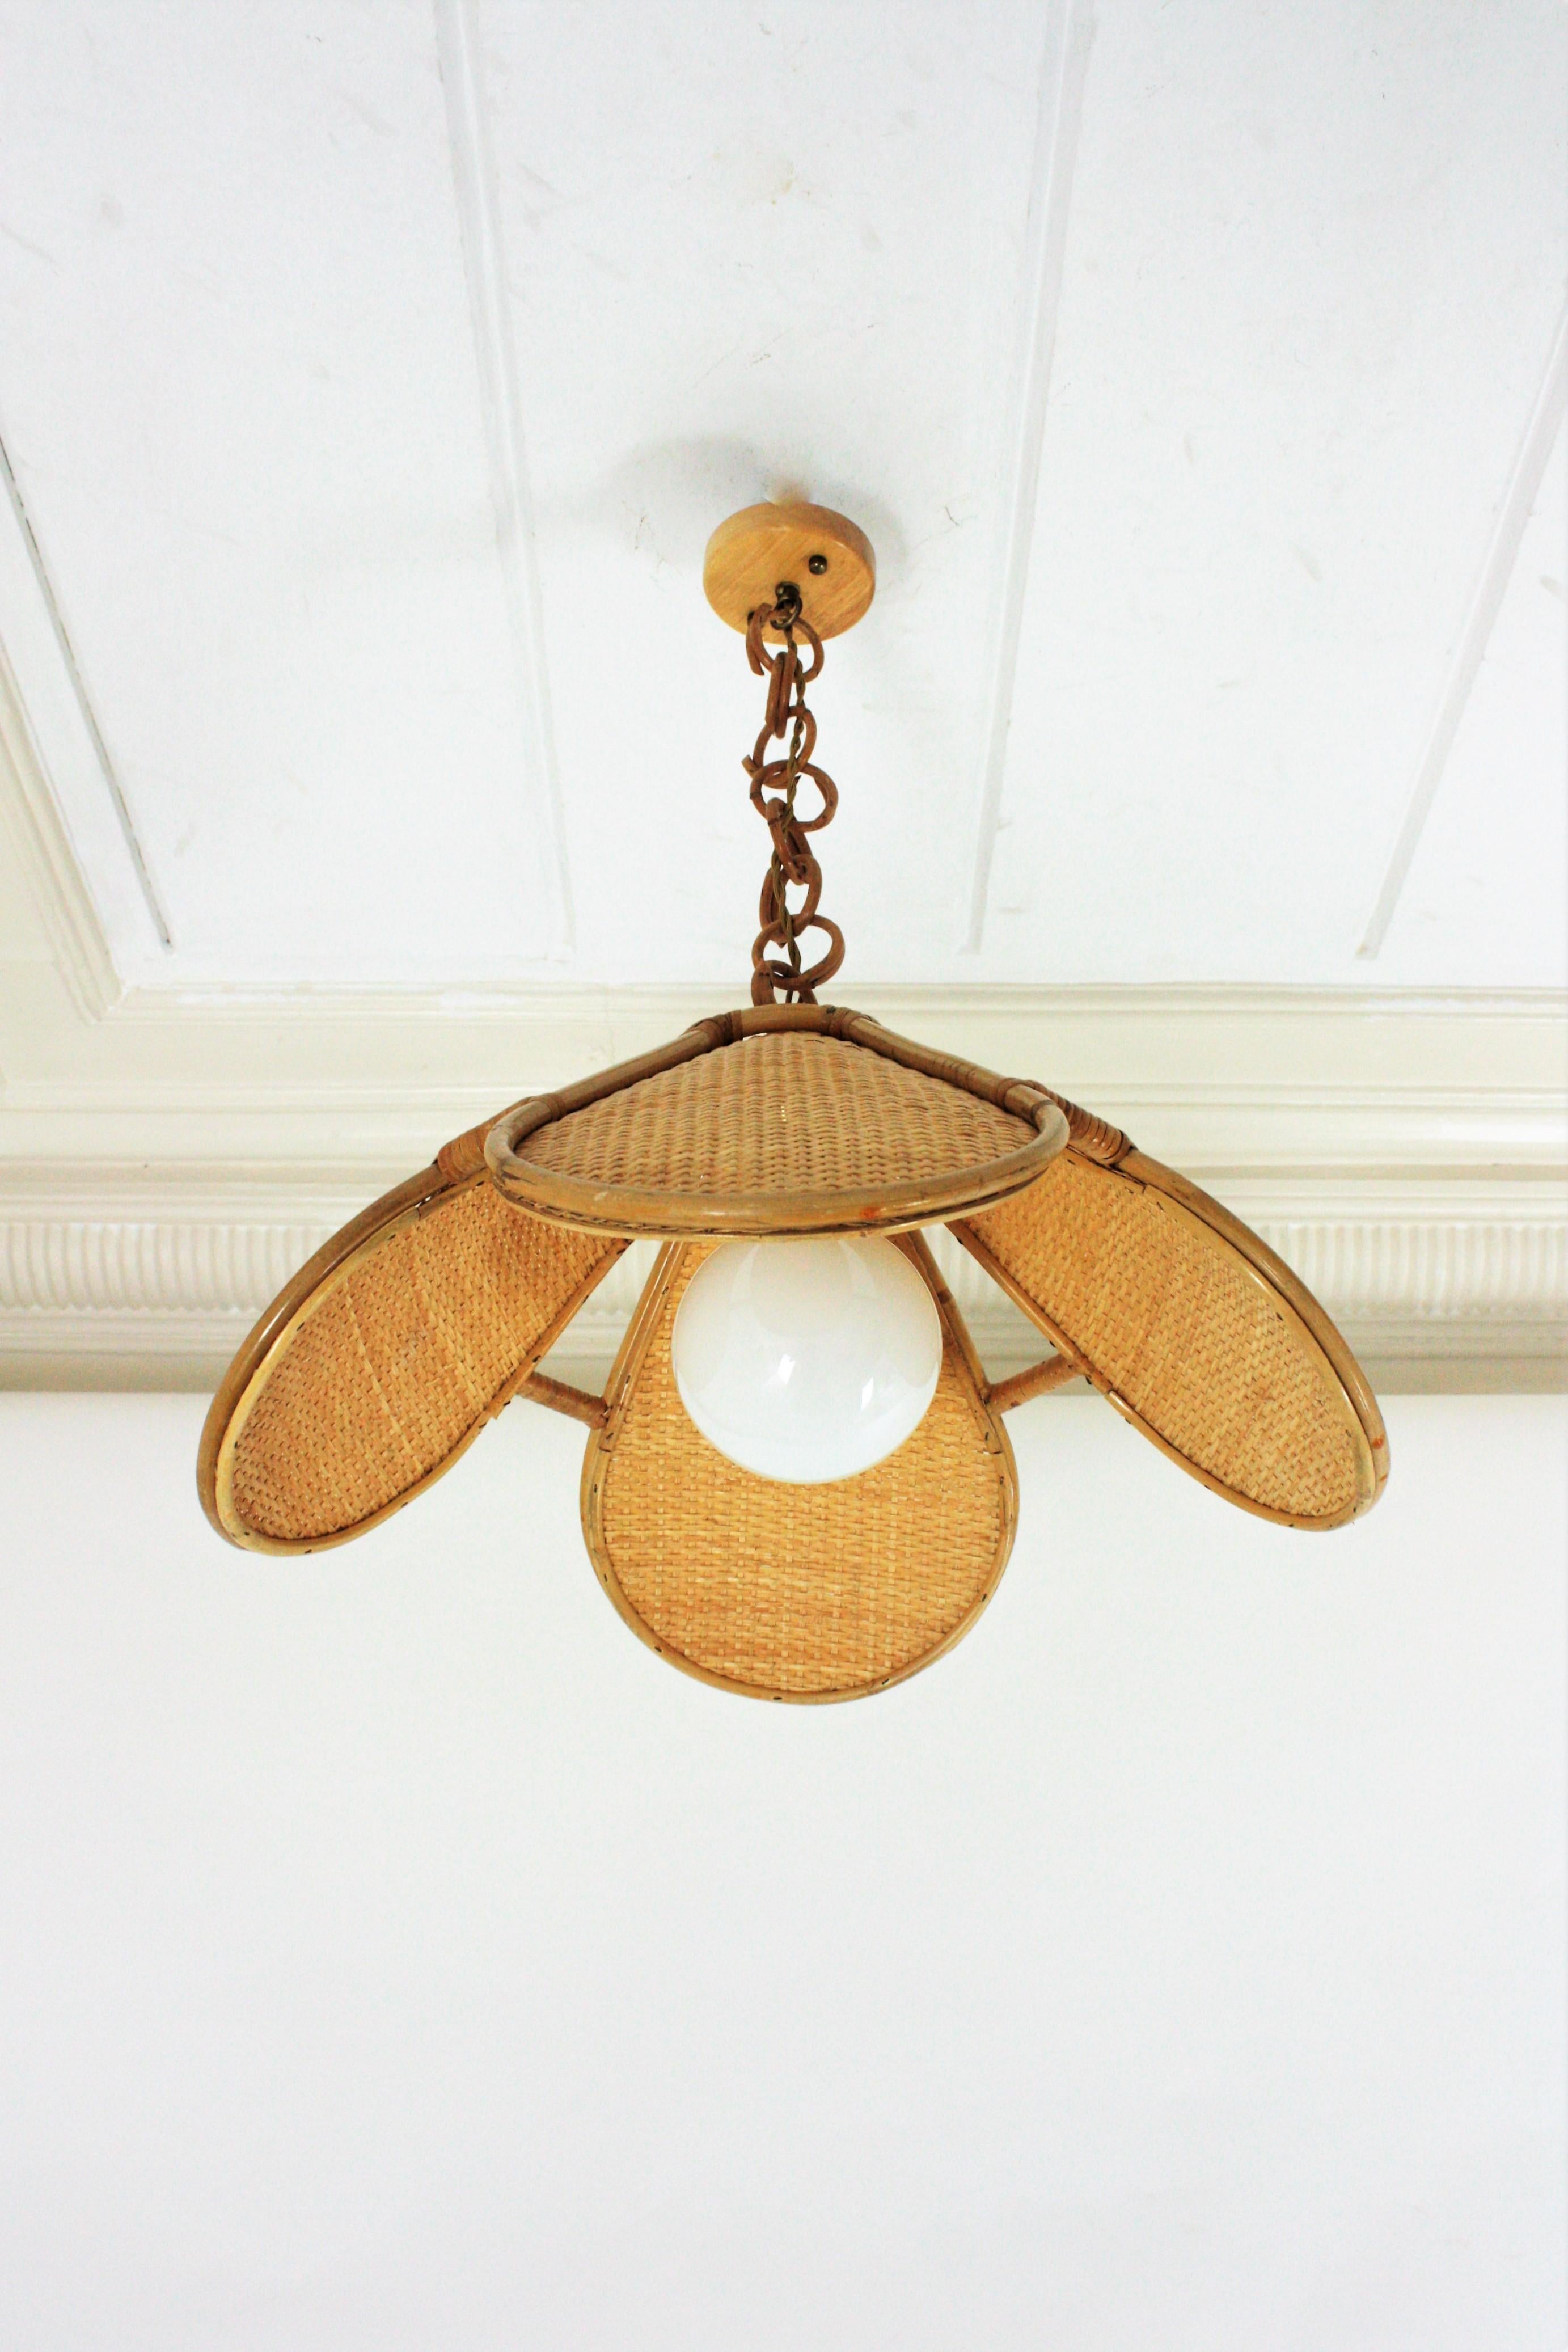 Elegant handcrafted bamboo and rattan or wicker weave flower shaped or palm pendant hanging lamp, Spain, 1960s.
This beautiful suspension lamp features a palm shaped bamboo lampshade structure with woven wicker panels. It hangs from a chain with